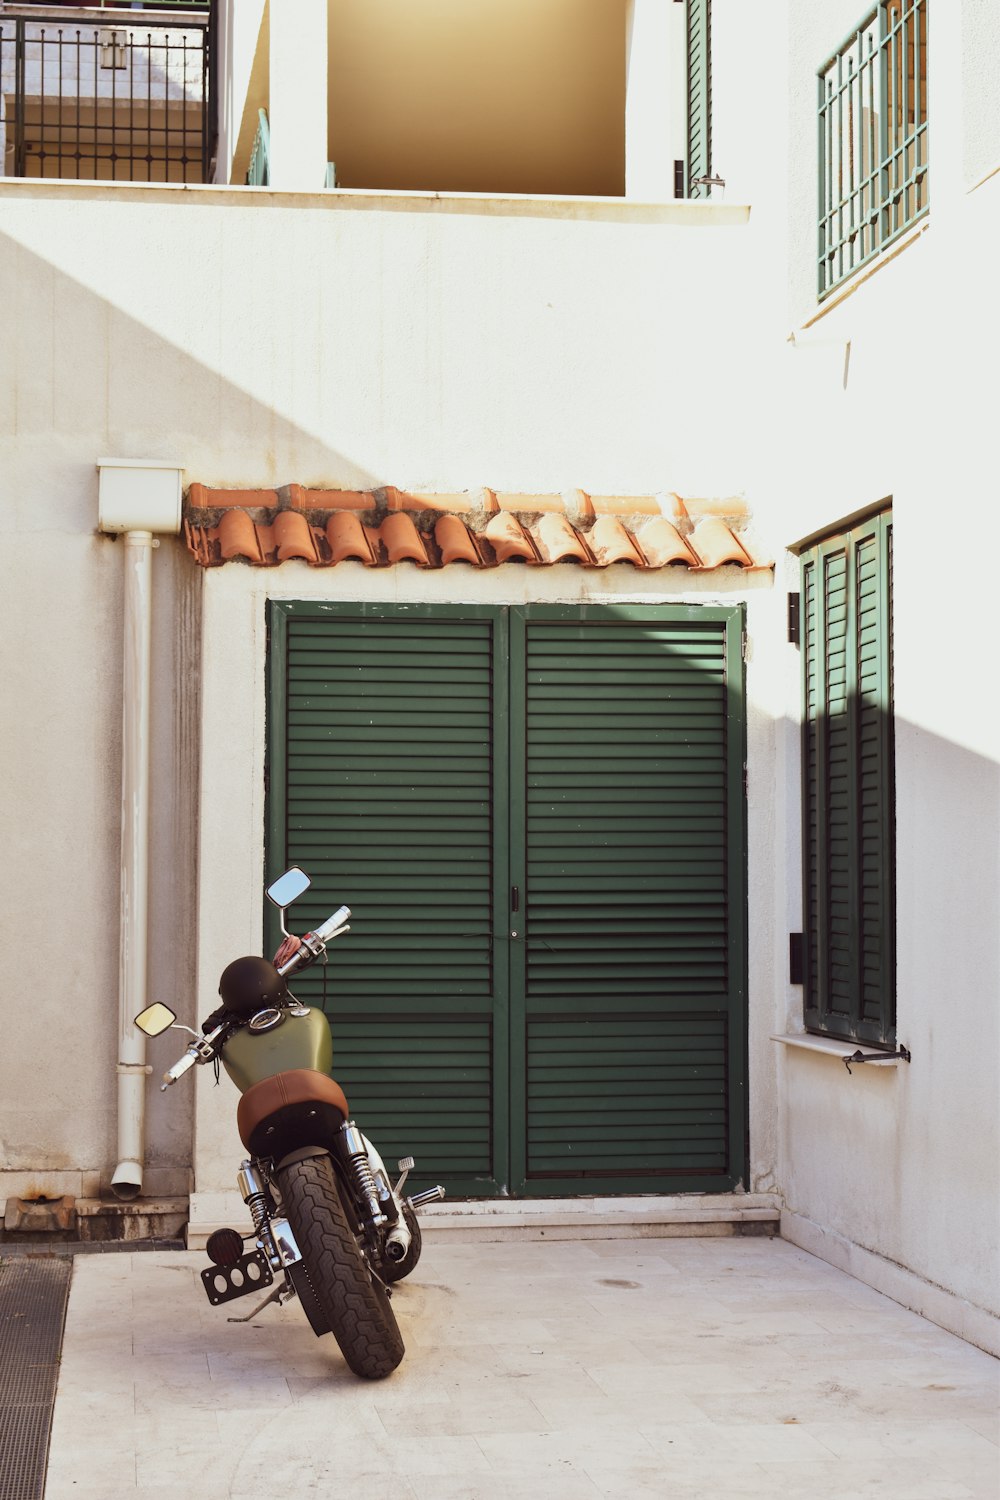 a motorcycle parked in front of a building